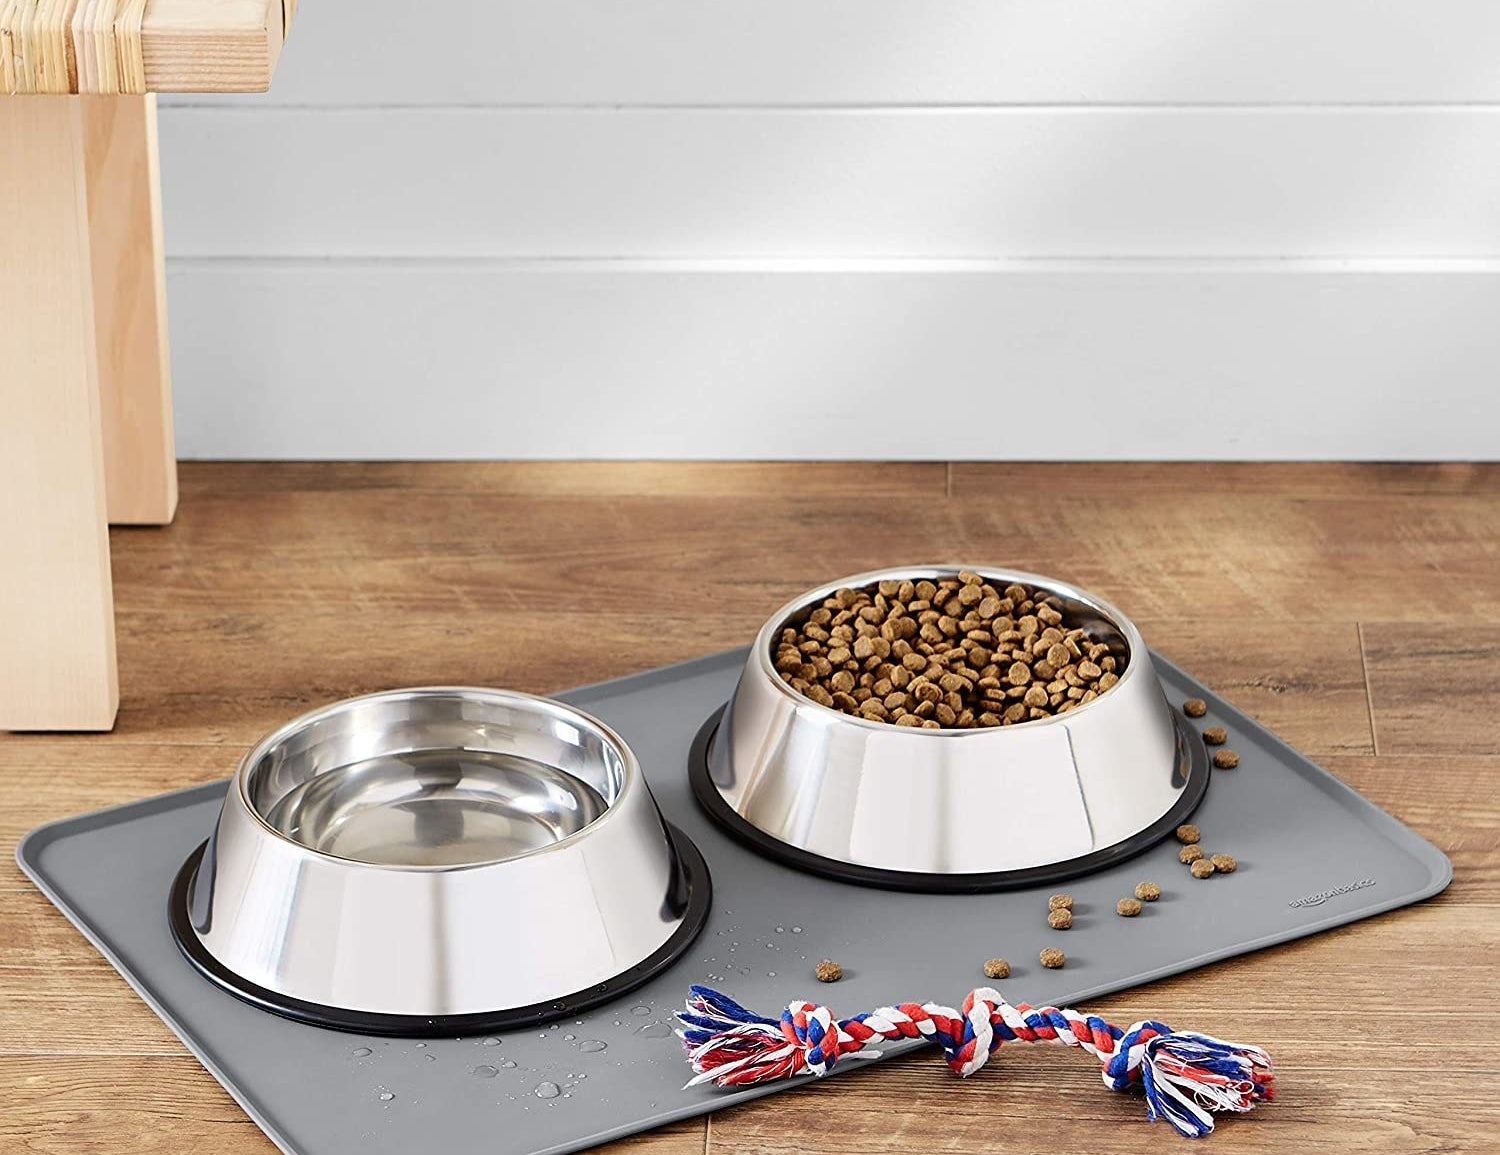 a pair of pet bowls on the non-slip mat